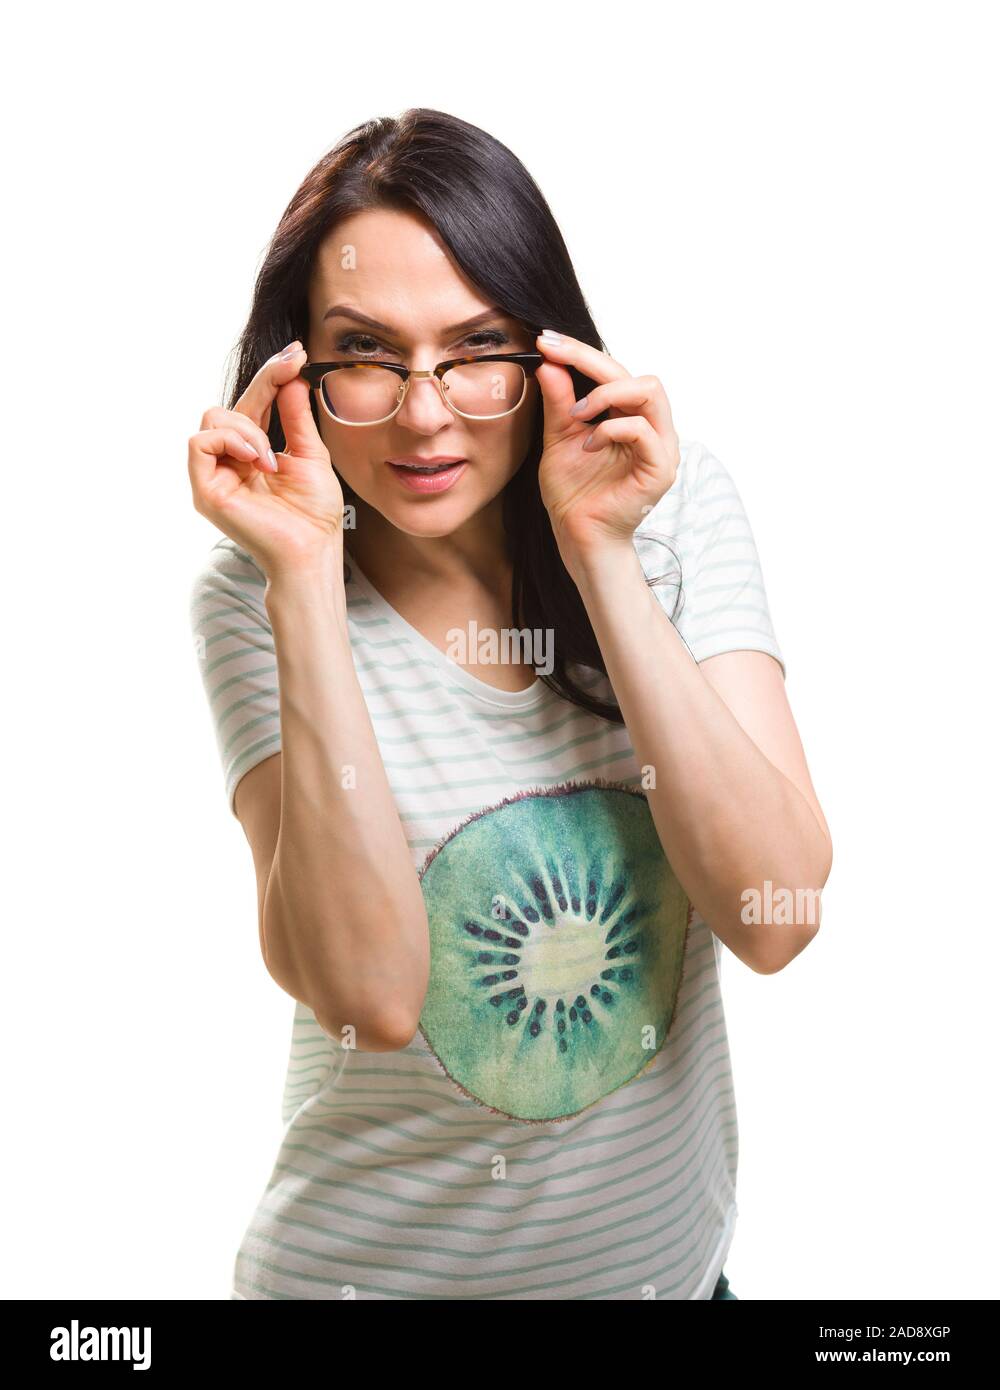 Woman with her glasses lifted up can't see Stock Photo